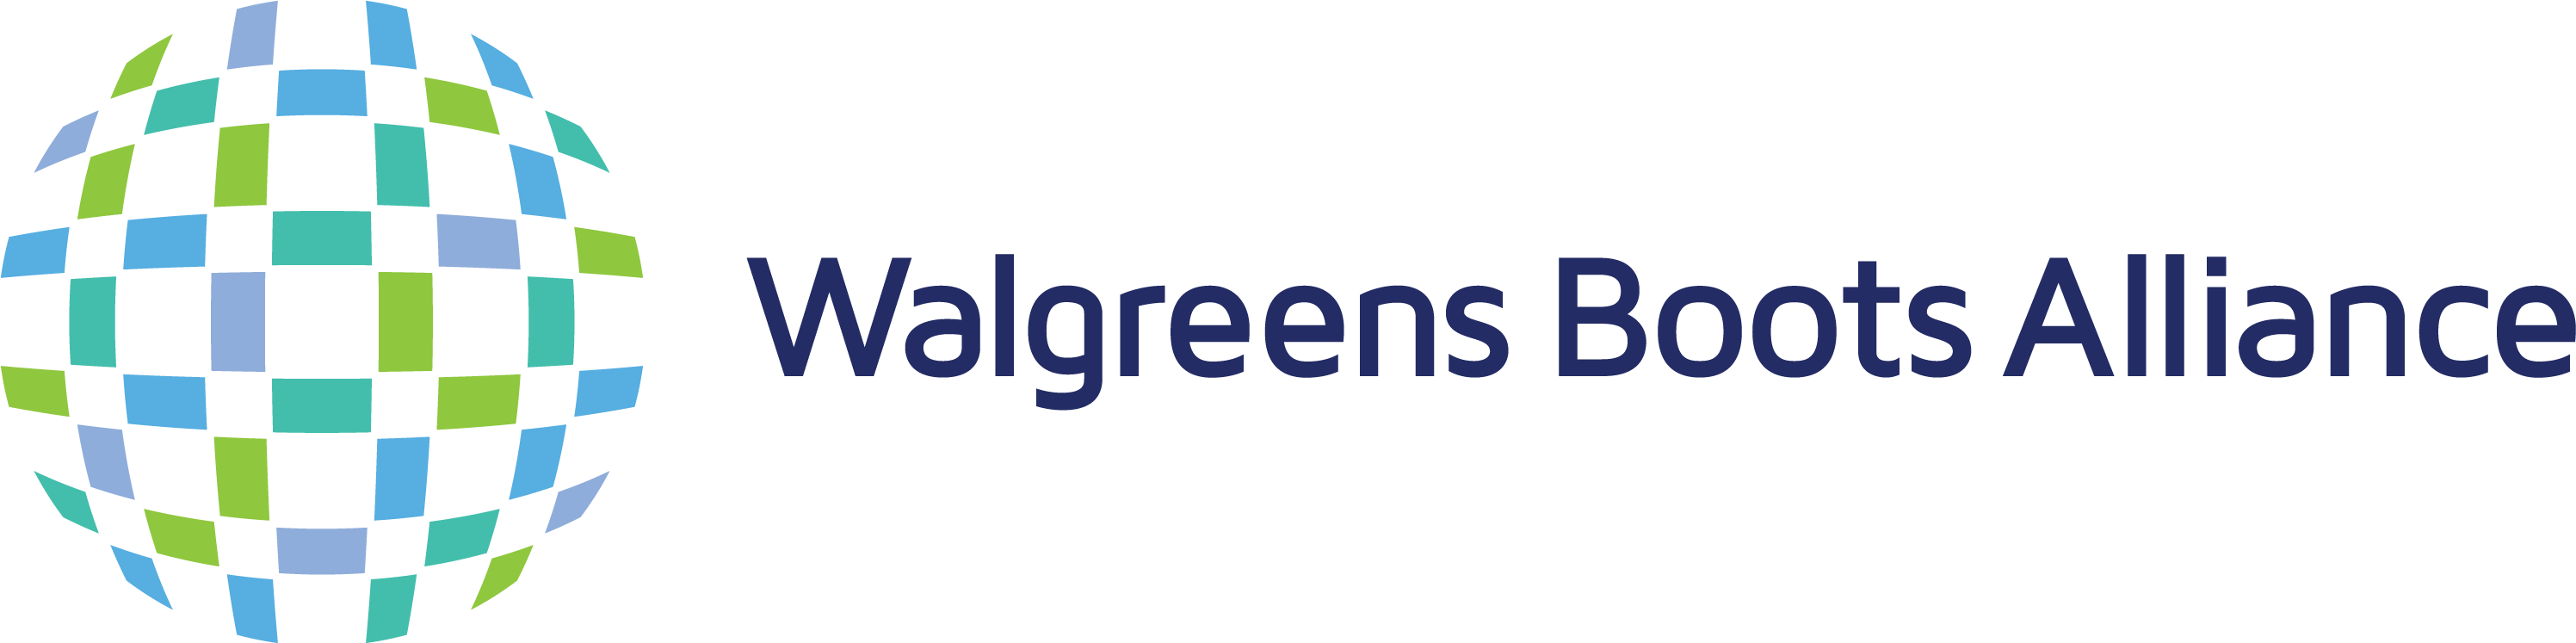 Walgreens Boots Alliance - Walgreens Boots Alliance Png (3240x960)